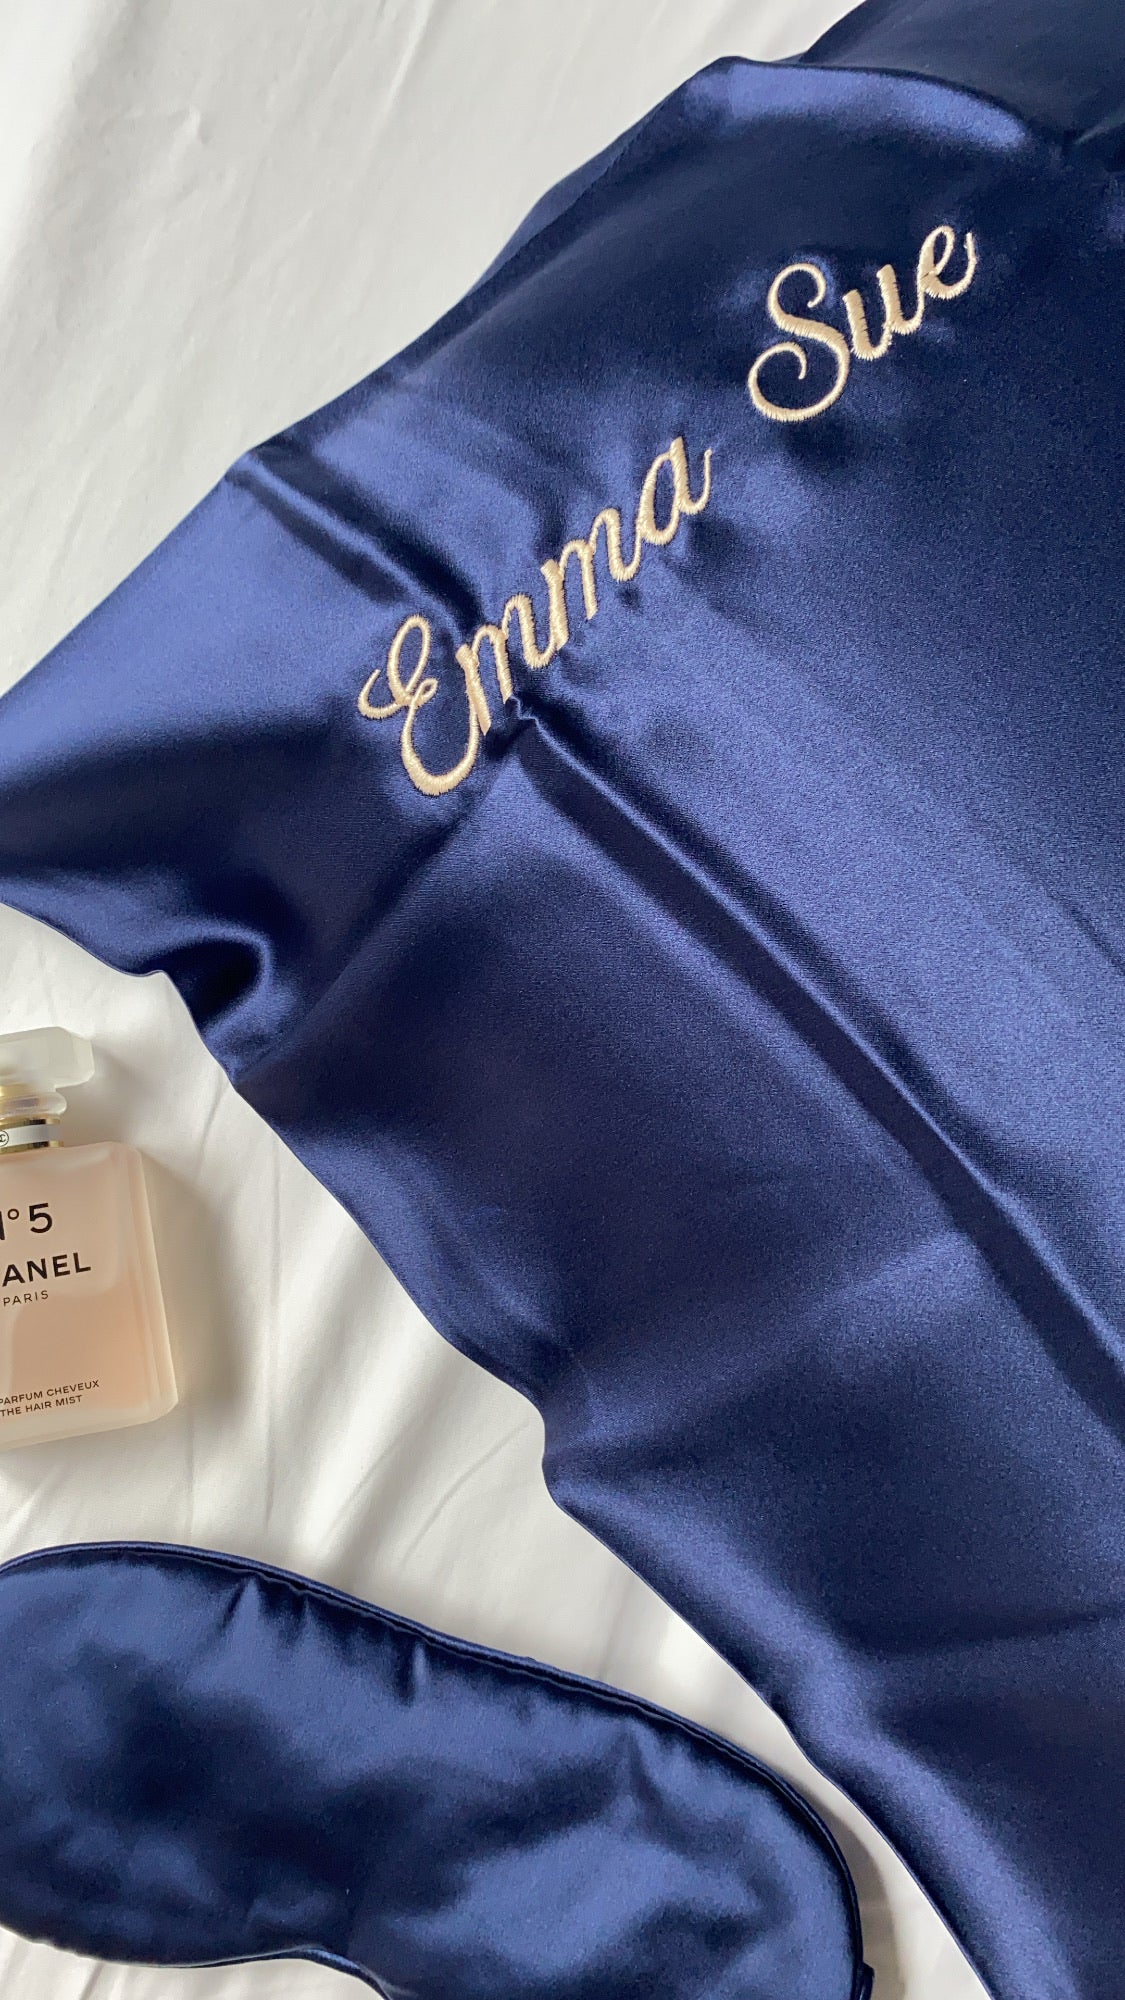 Make your silk pillowcase special with our embroidery services to show your love to a friend, partner or bridesmaid! Pair it with our matching silk eye mask for a luxurious, good night’s sleep.